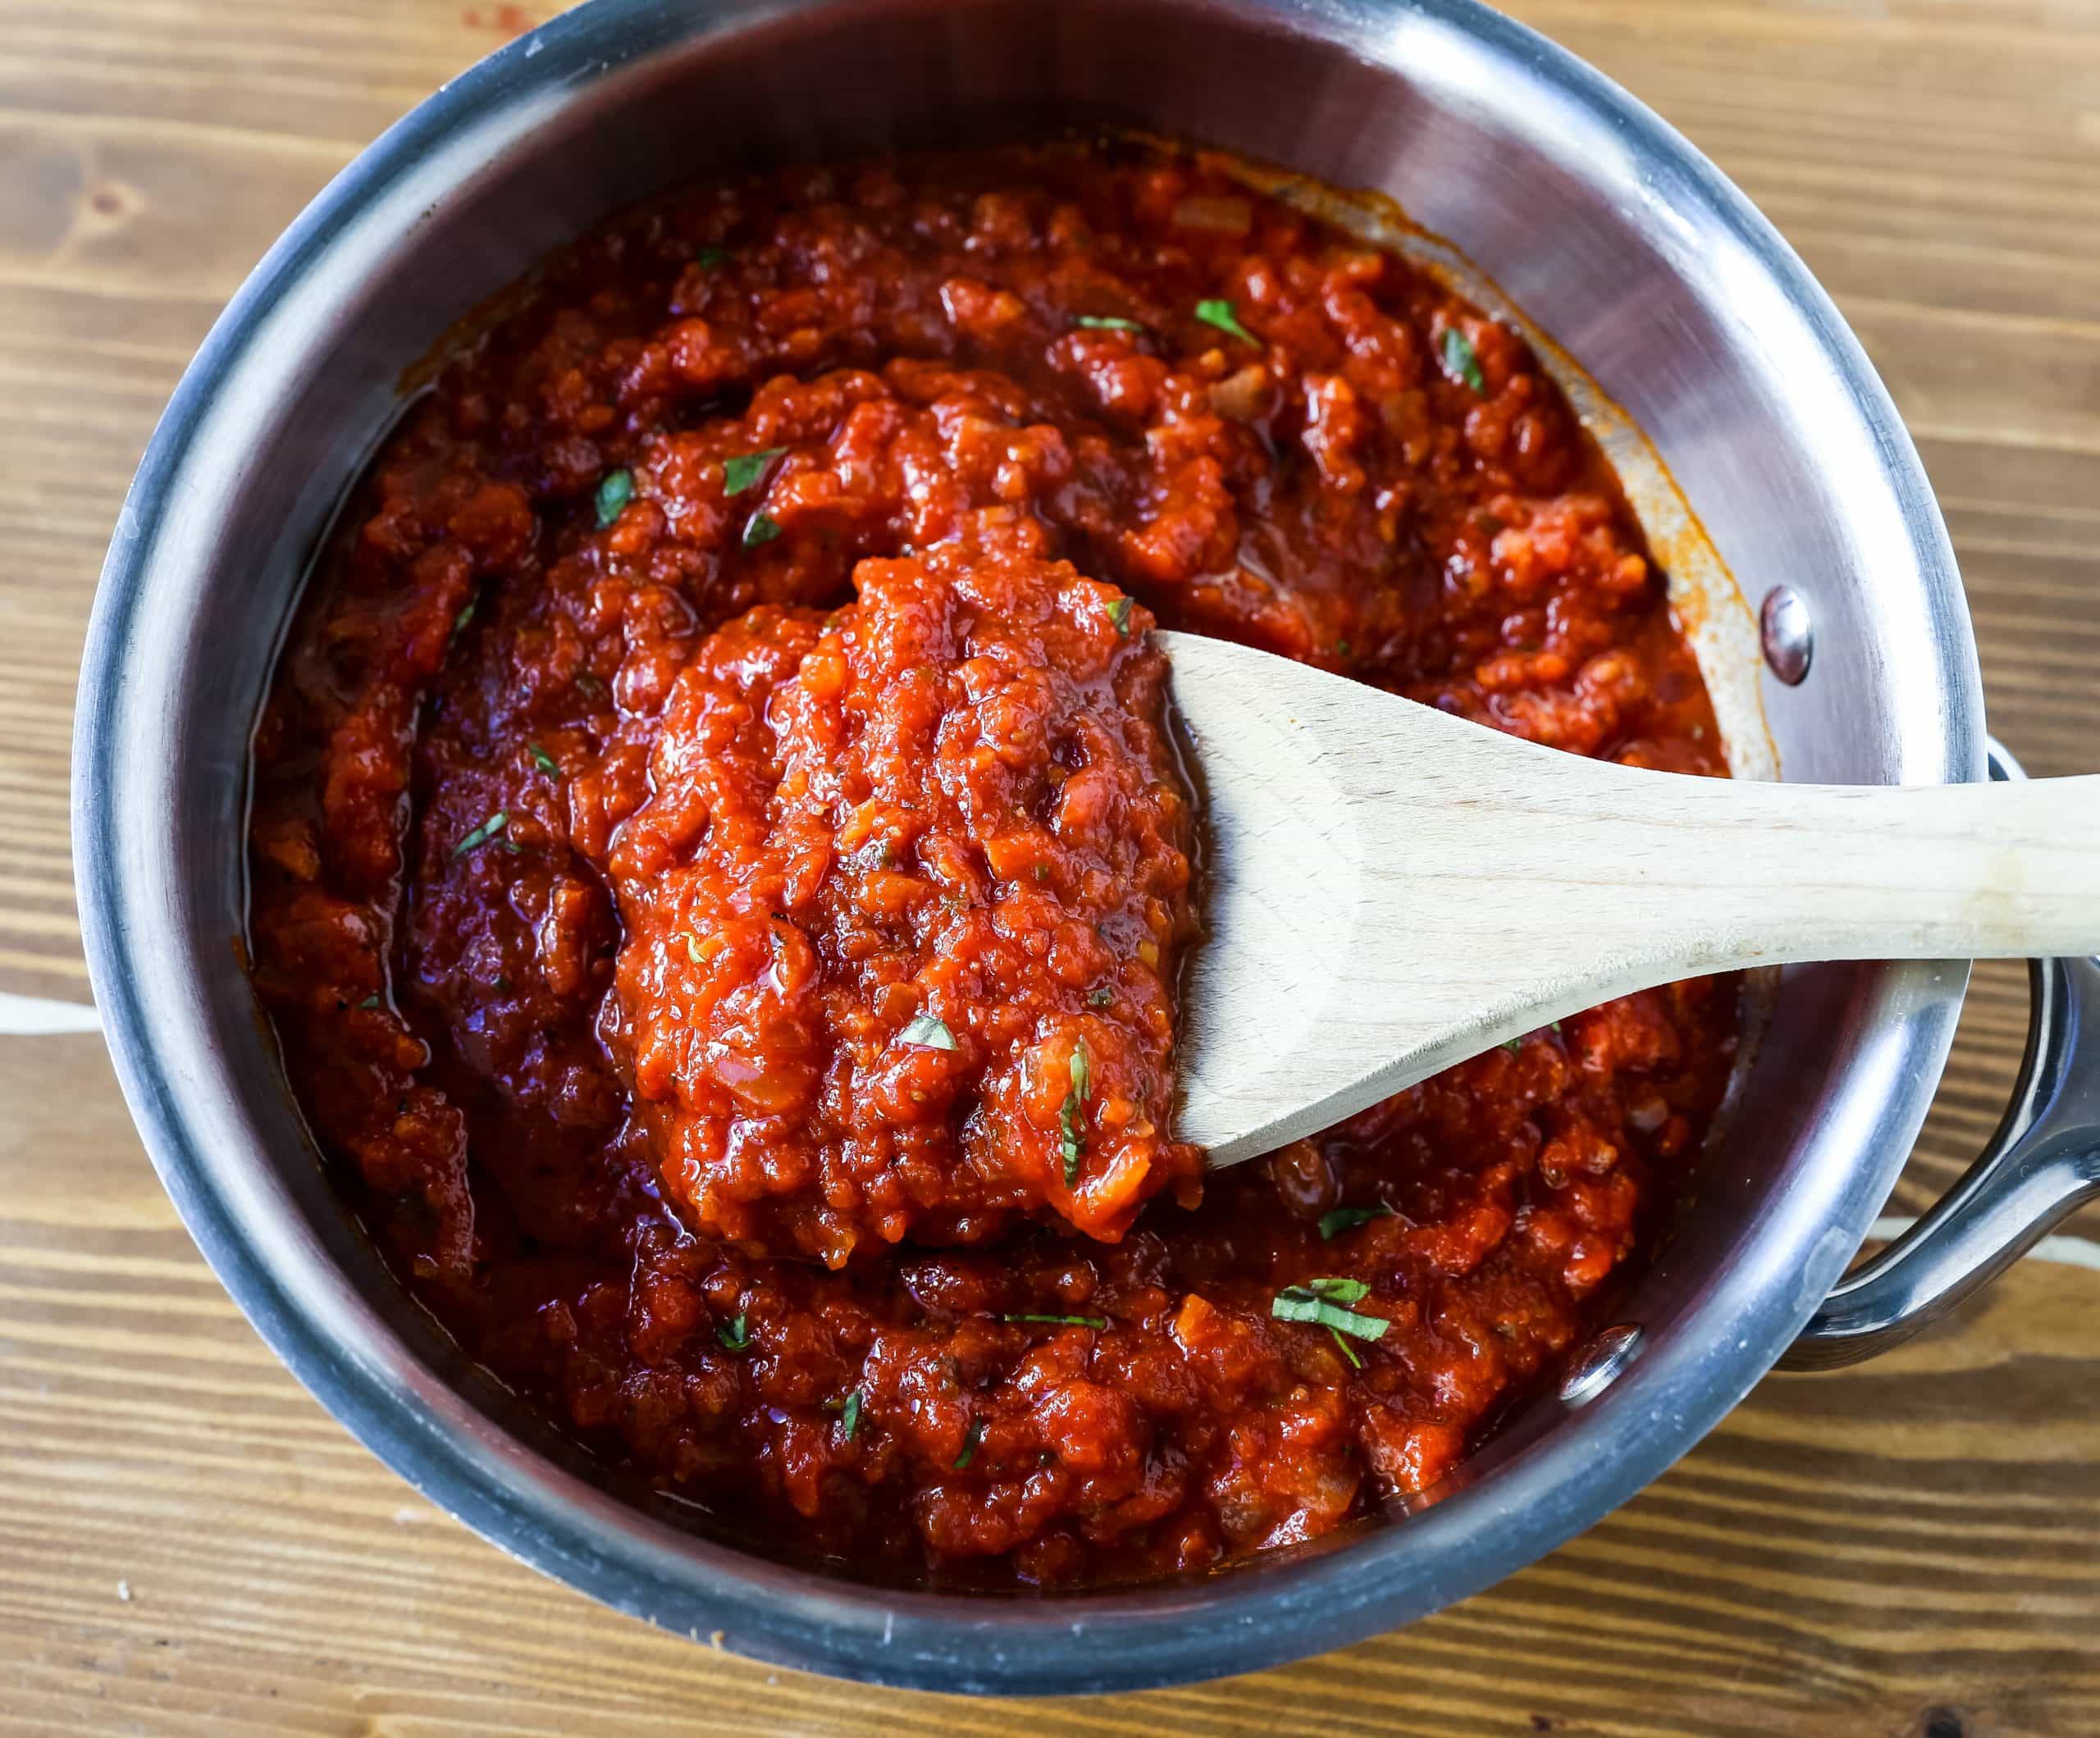 Classic Italian Tomato Sauce A robust tomato sauce made with olive oil, onion, sweet carrot, garlic, canned San Marzano tomatoes, fresh basil, tomato paste, oregano, and red pepper flakes. A flavorful, homemade tomato sauce to pair perfectly with any type of pasta. www.modernhoney.com #tomatosauce #marinara #marinarasauce #italian #italianfood